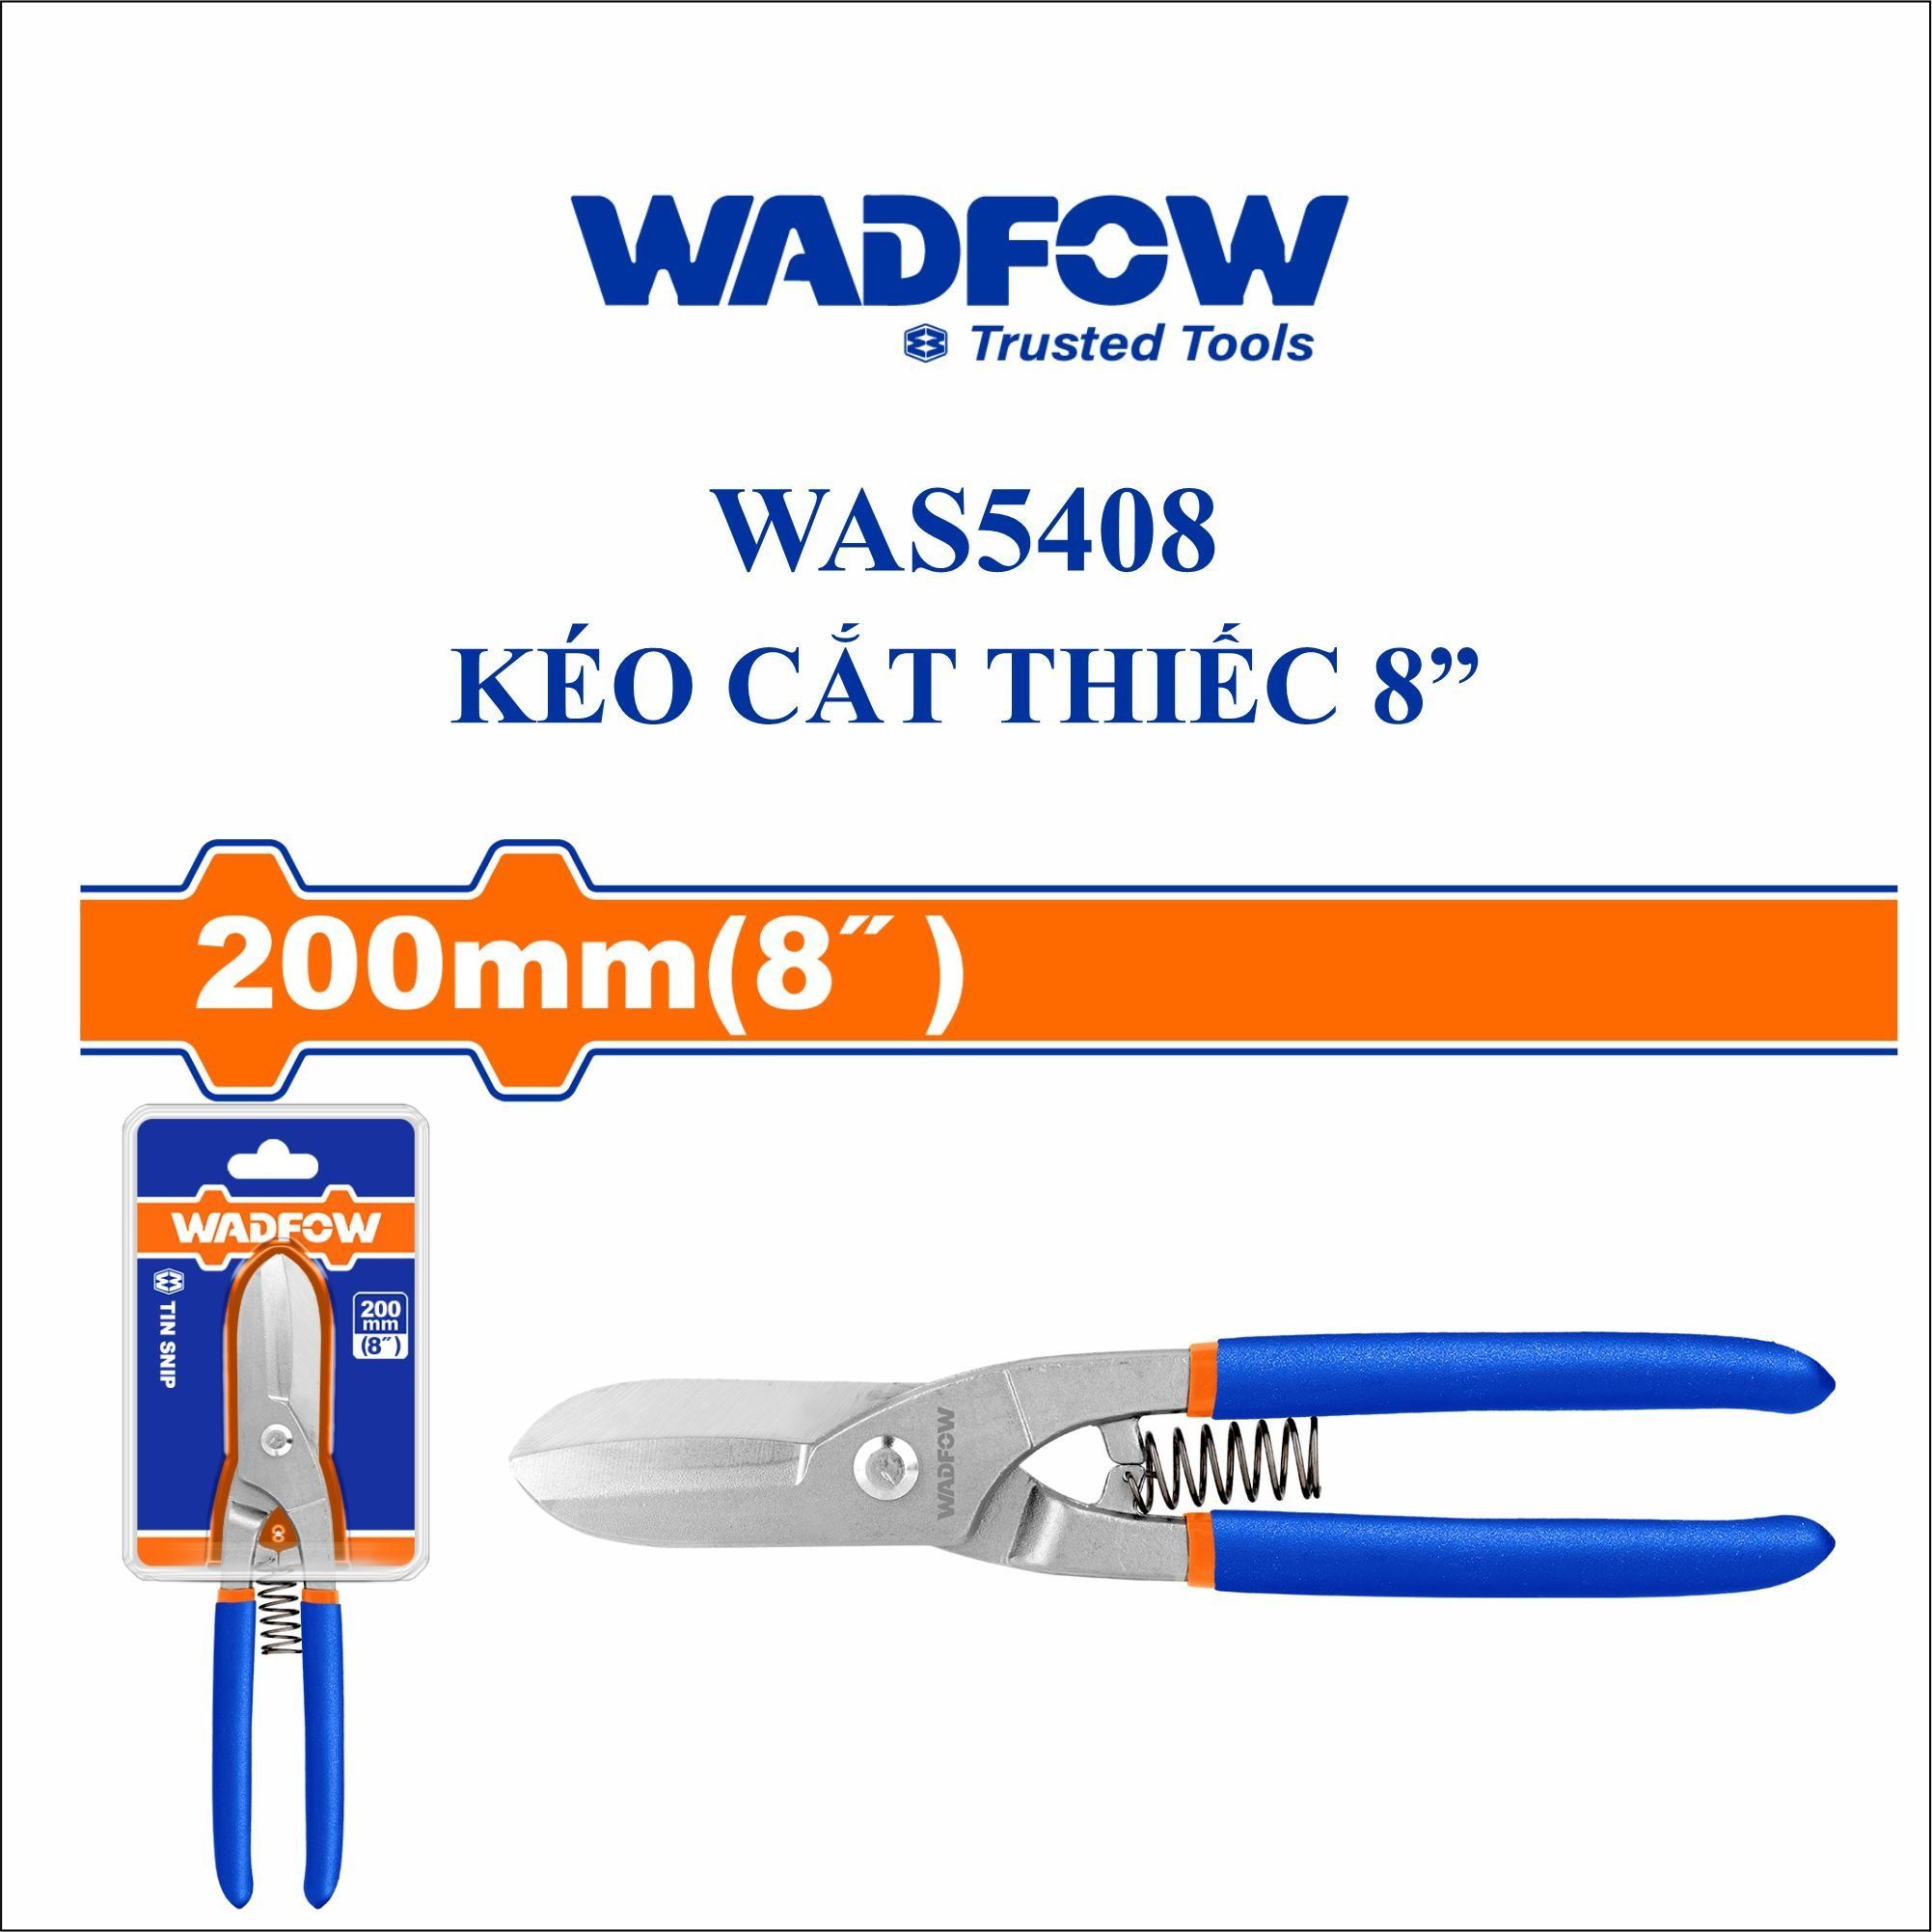  Kéo cắt thiếc 8 Inch WADFOW WAS5408 